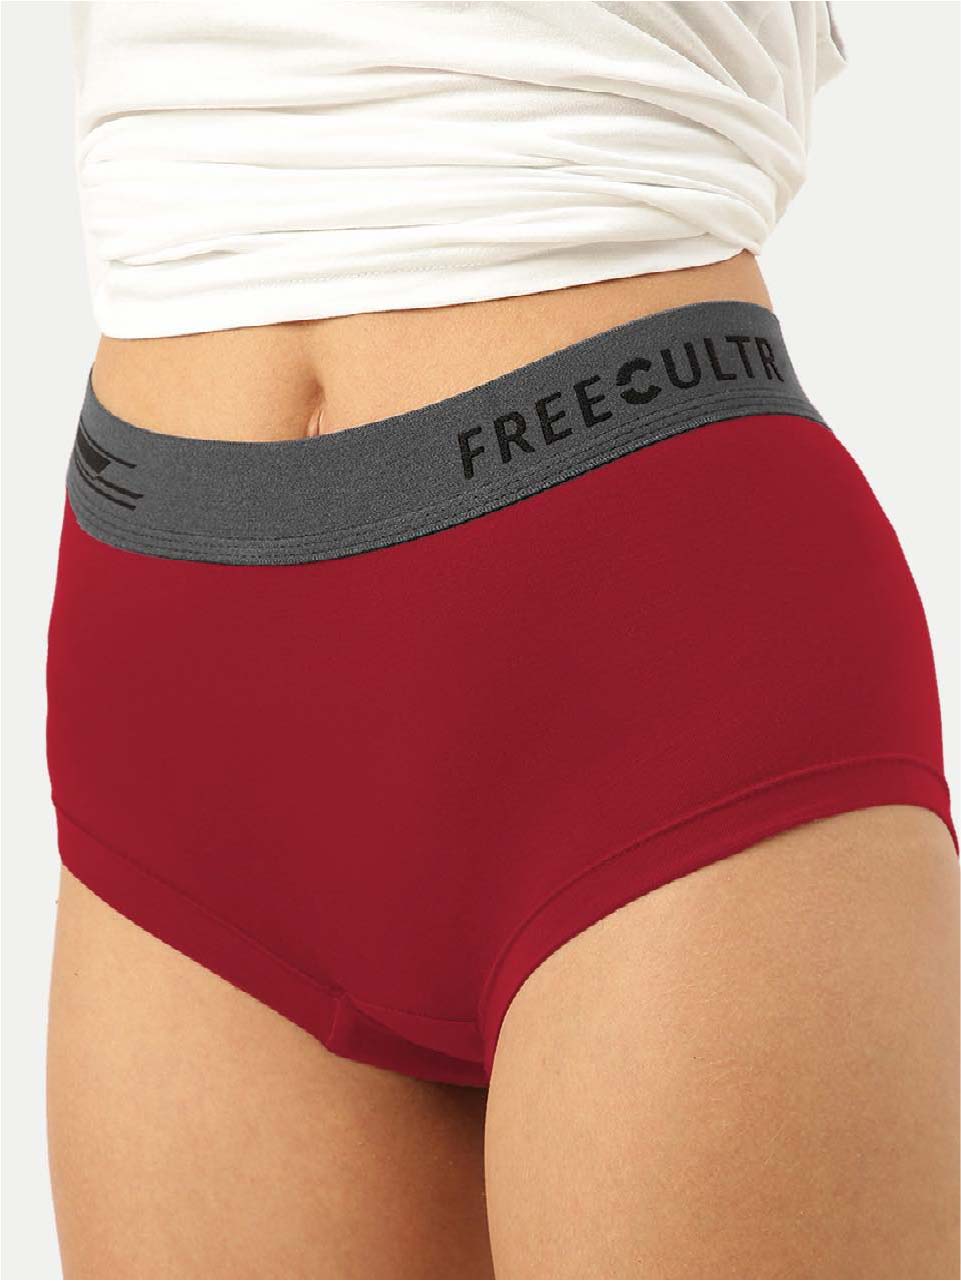 Women's Micro Modal Boxer Brief (Pack of 3)